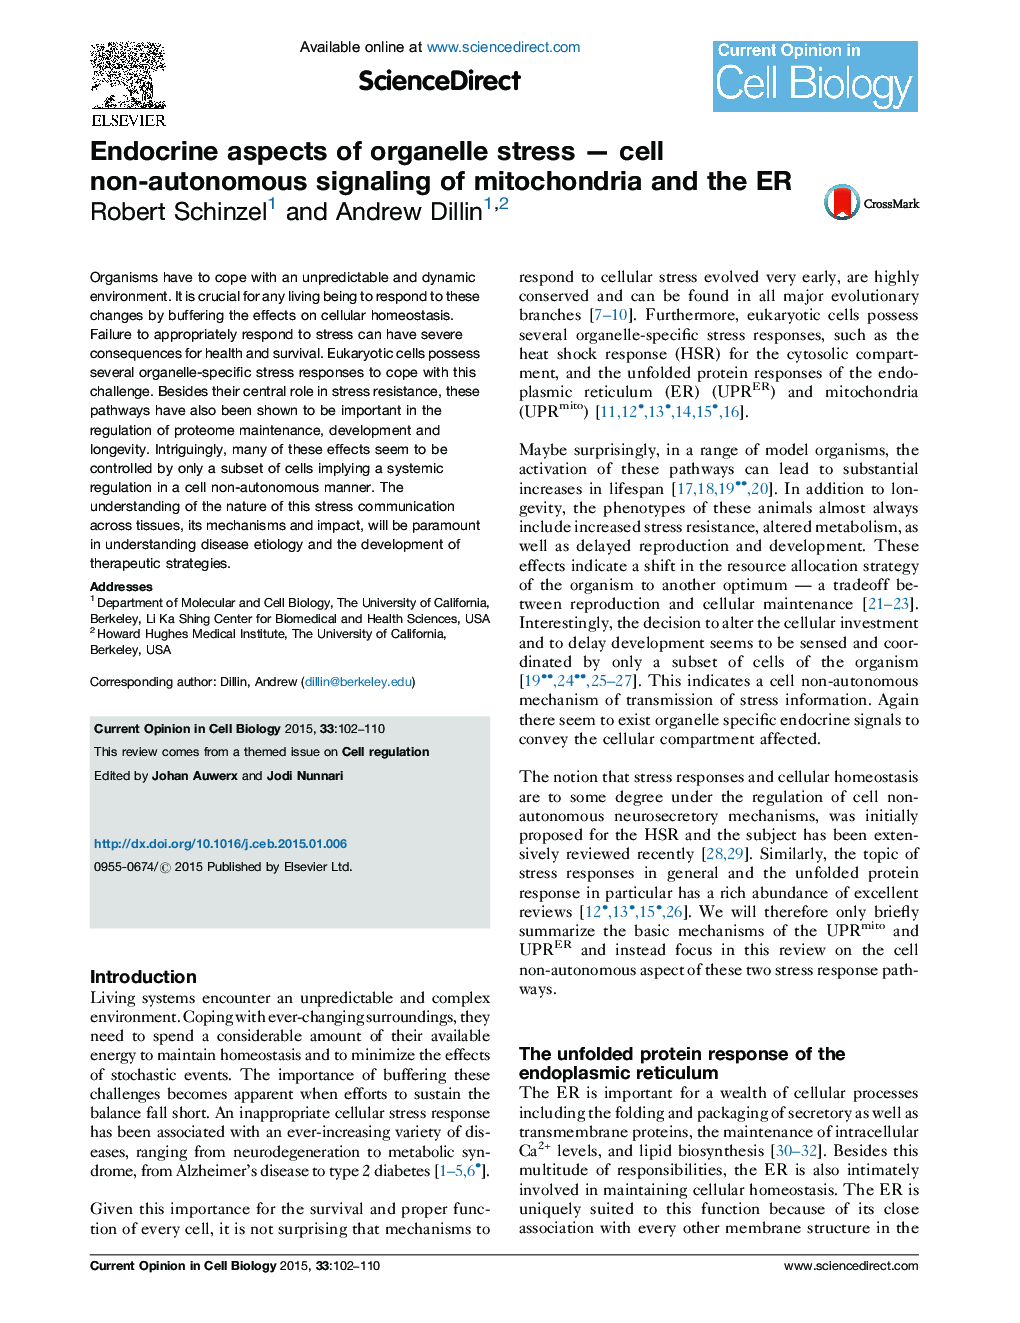 Endocrine aspects of organelle stress - cell non-autonomous signaling of mitochondria and the ER